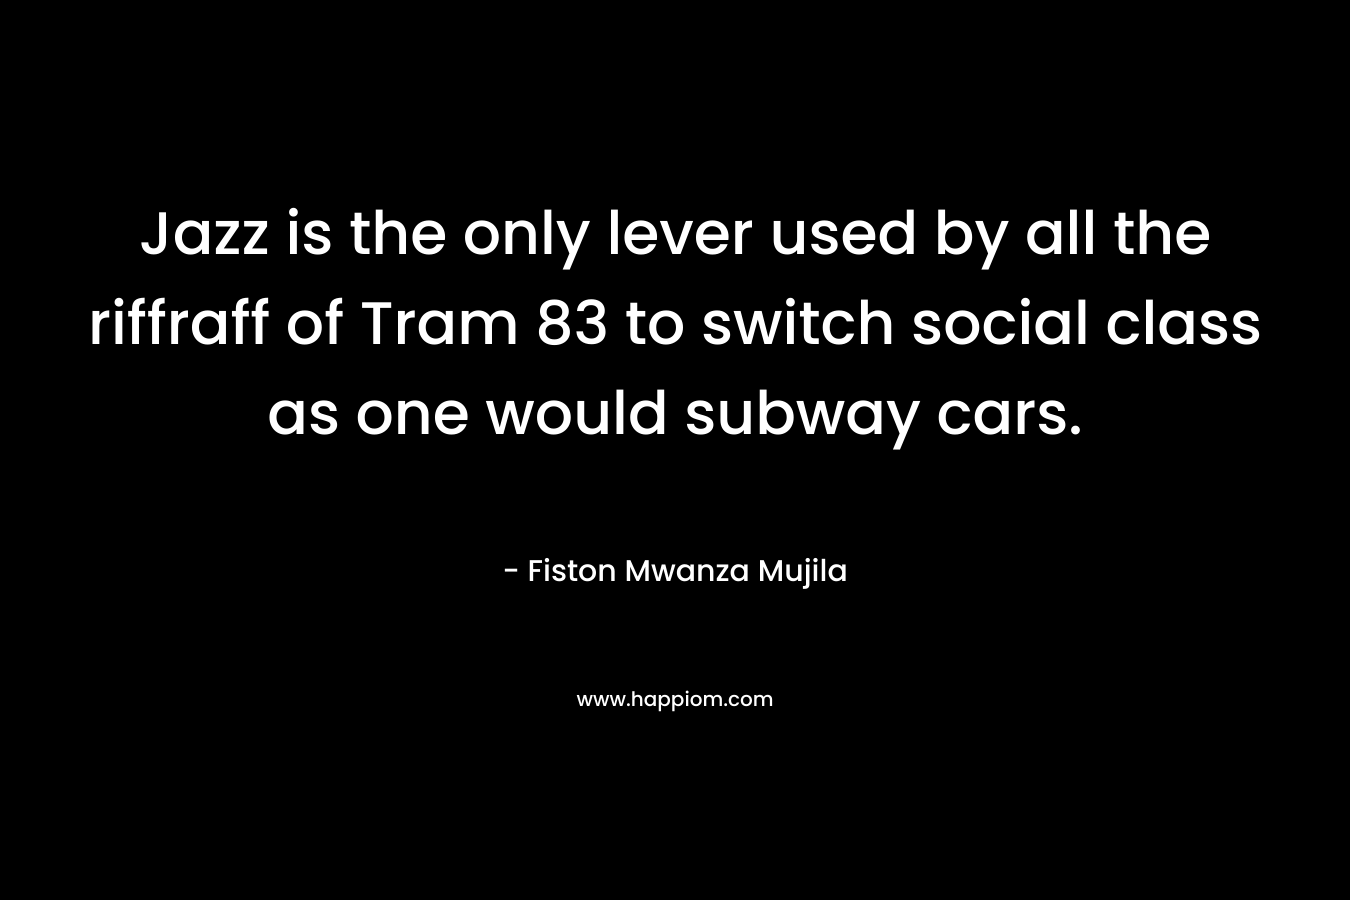 Jazz is the only lever used by all the riffraff of Tram 83 to switch social class as one would subway cars. – Fiston Mwanza Mujila